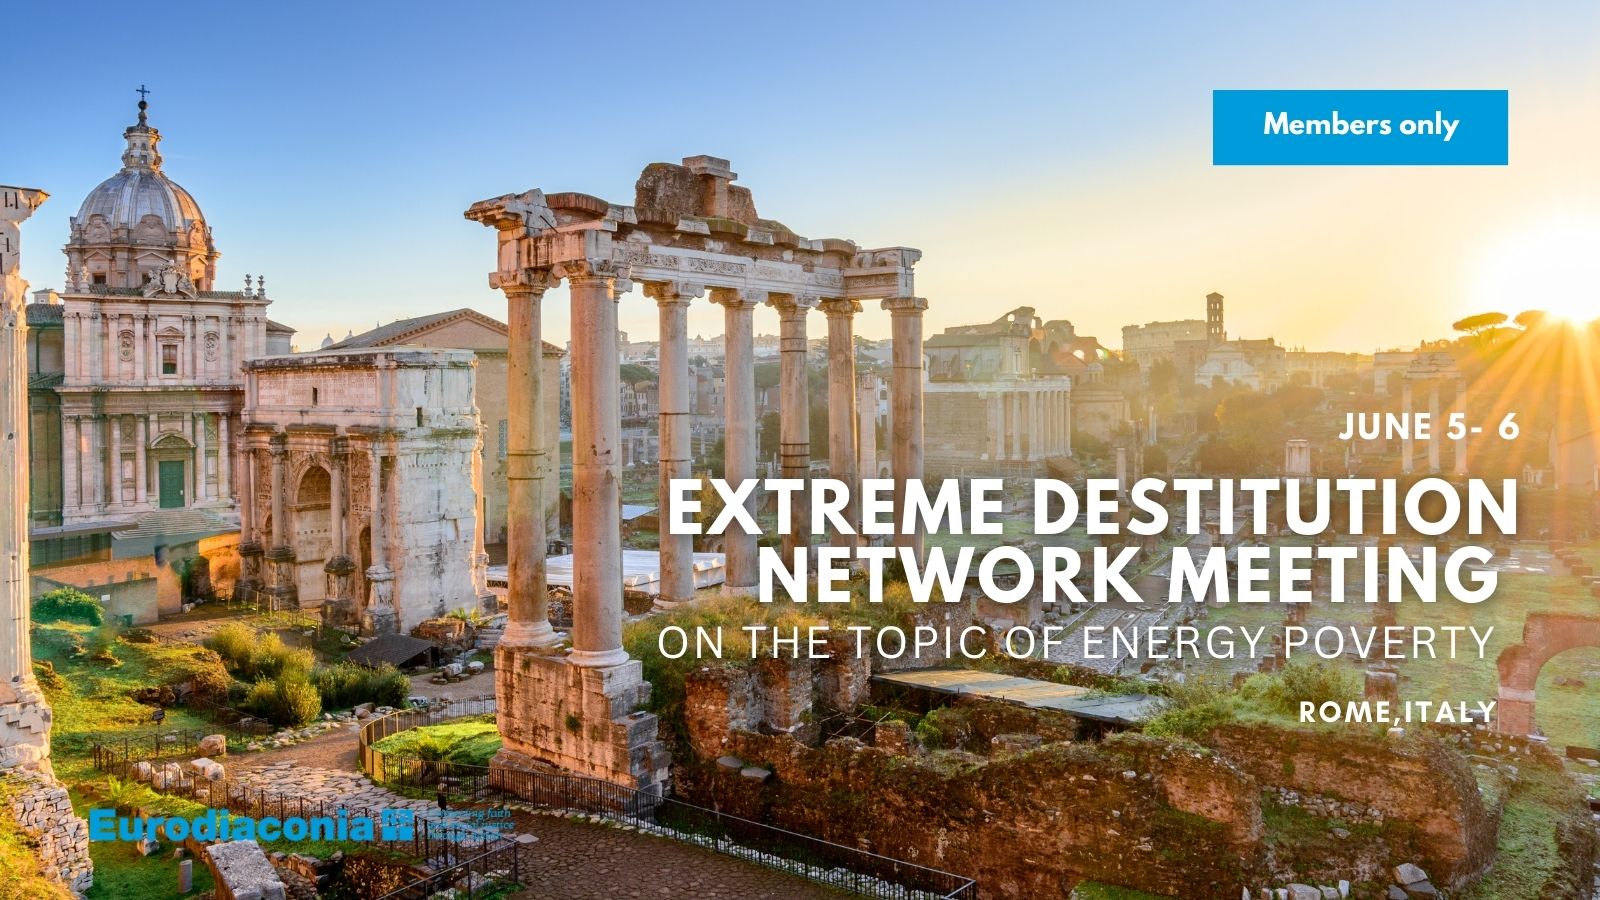 Extreme Destitution Network Meeting on the topic of Energy Poverty | Members only event